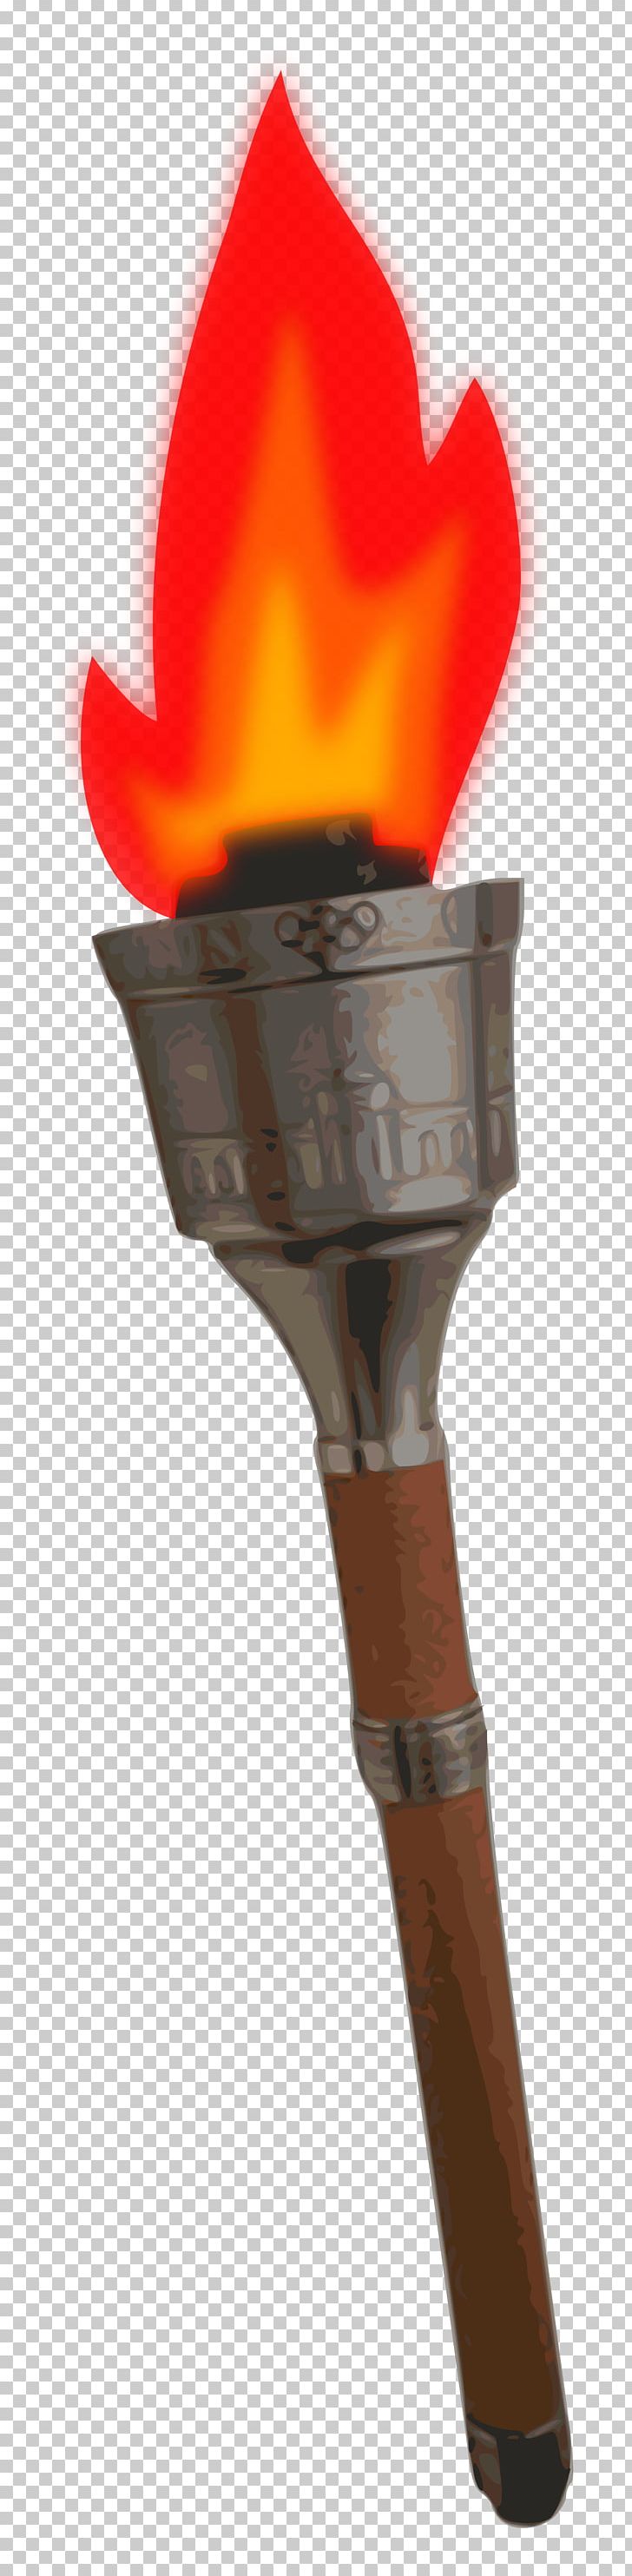 Winter Olympic Games 1984 Summer Olympics 2016 Summer Olympics Torch Relay Olympic Flame PNG, Clipart, 1984 Summer Olympics, 2016 Summer Olympics Torch Relay, 2018 Winter Olympics Torch Relay, Computer Icons, Free Software Foundation Free PNG Download